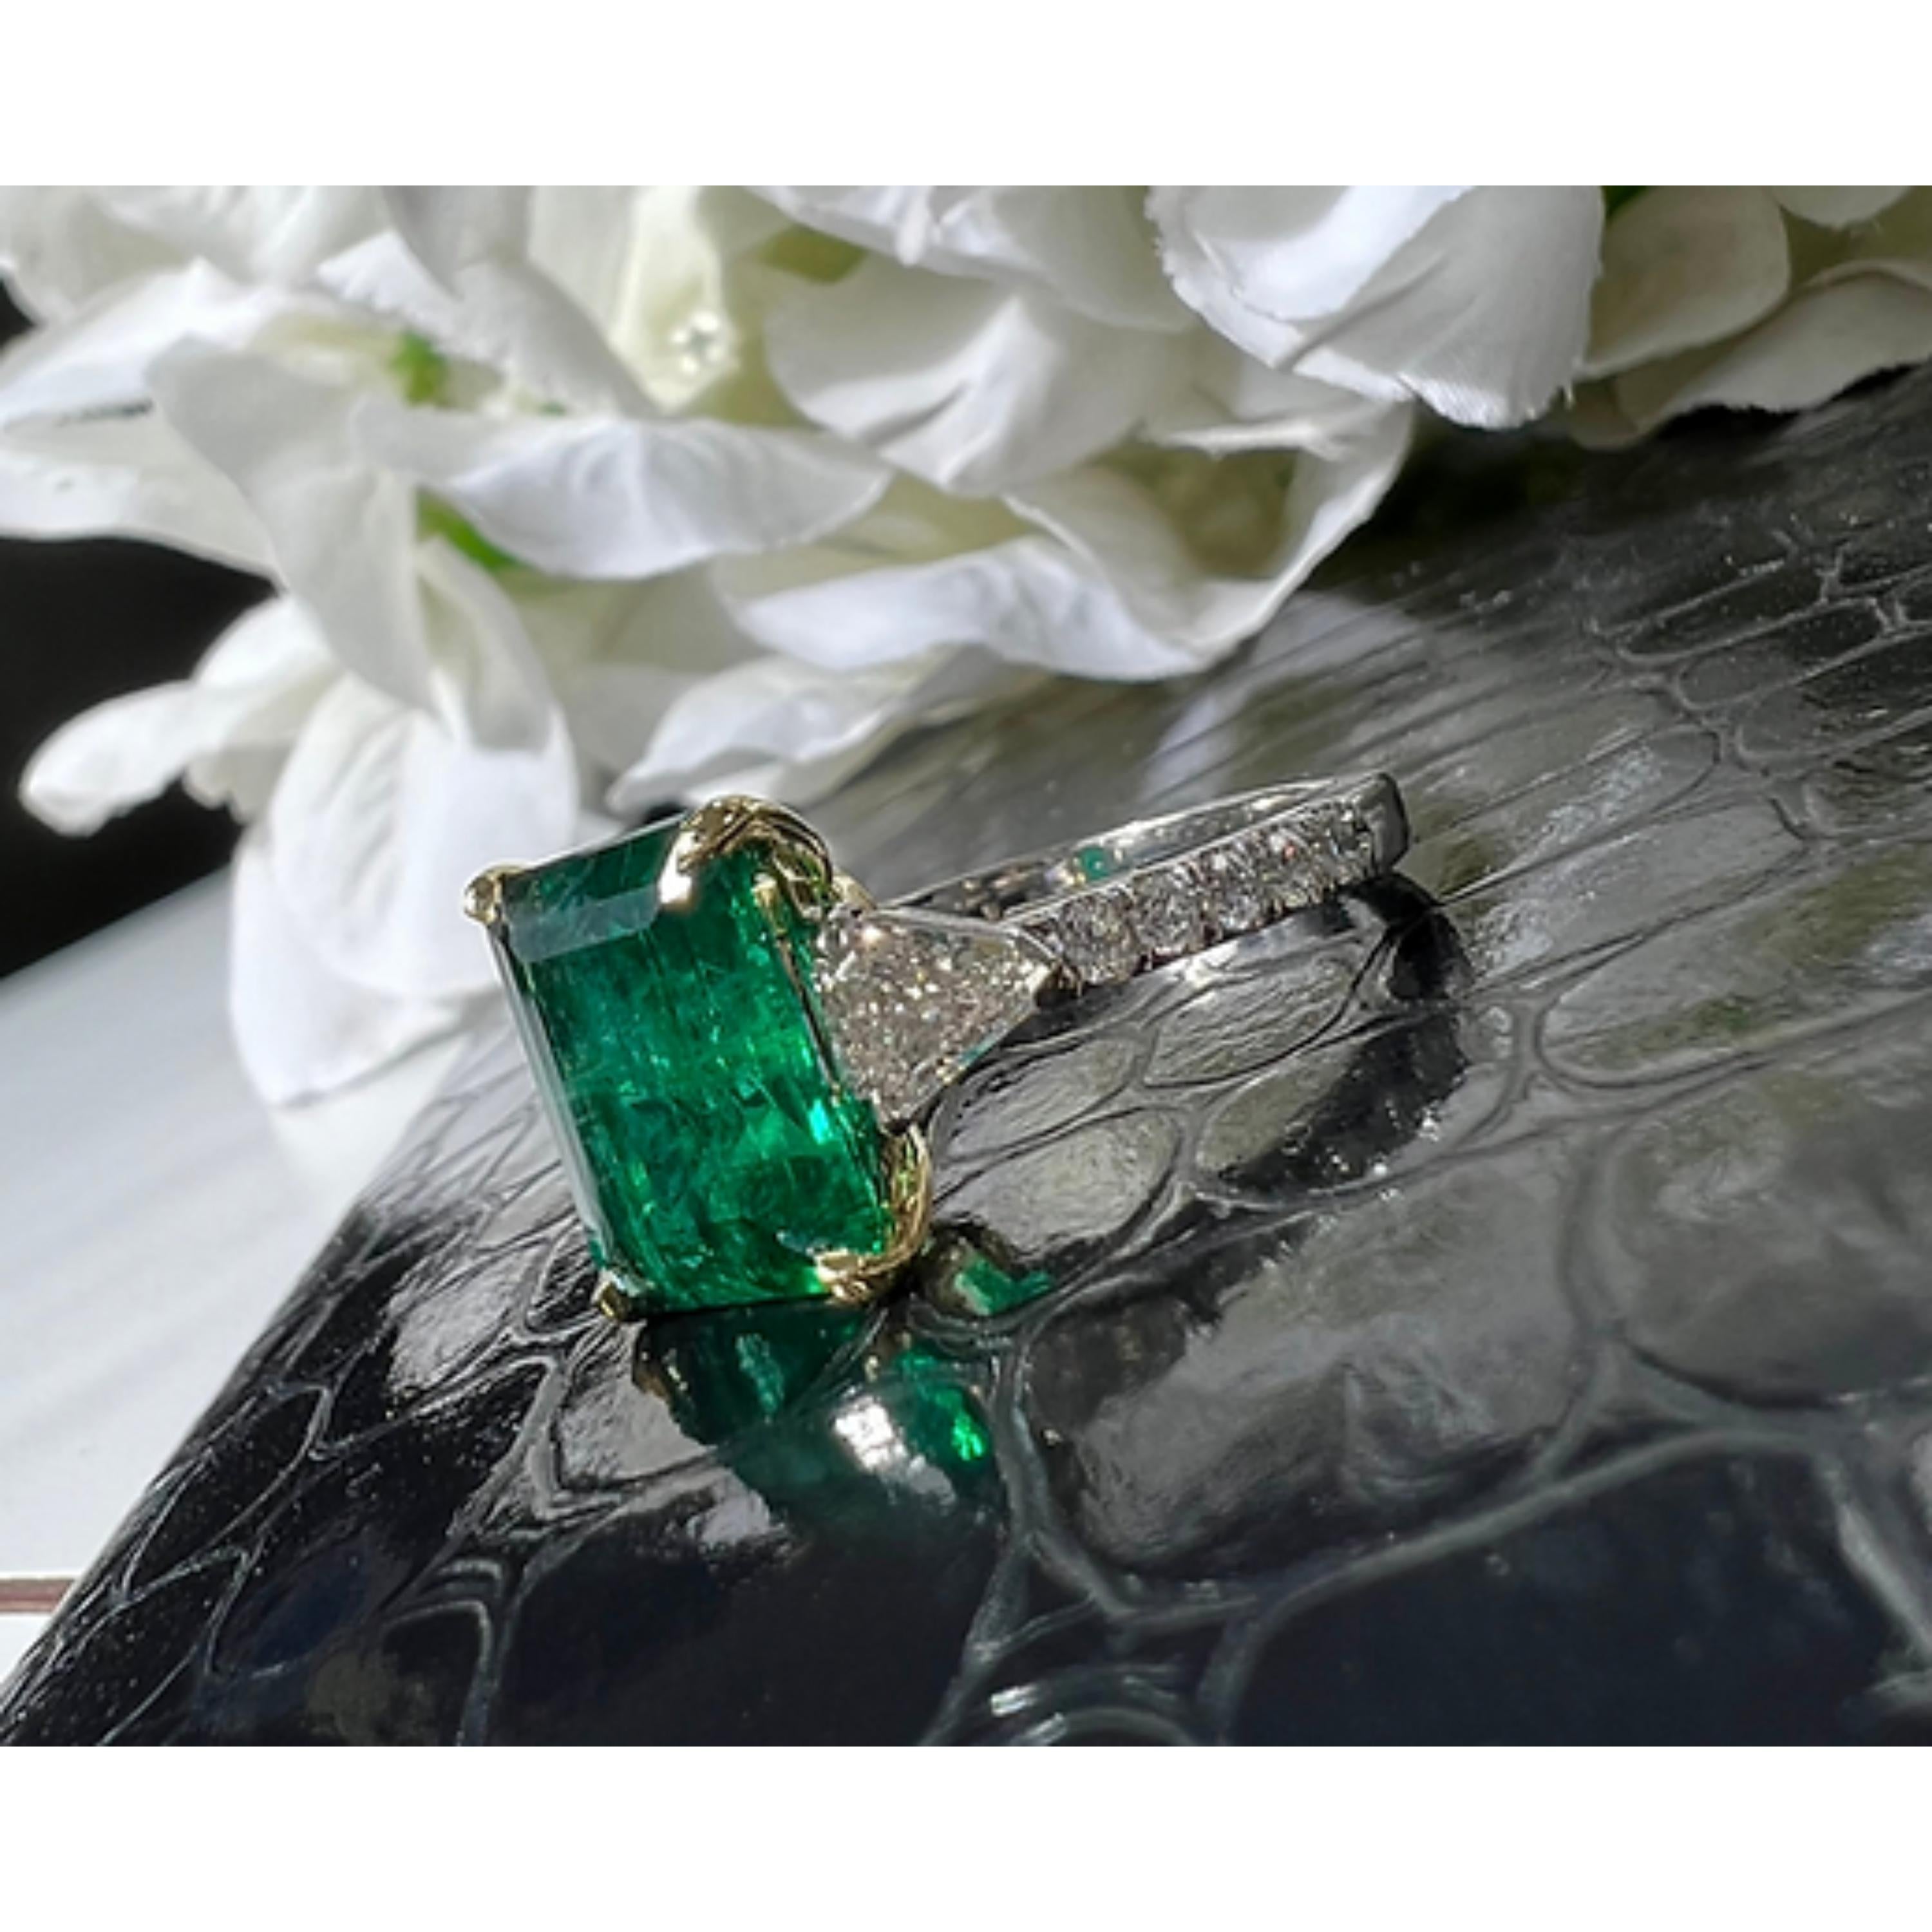 For Sale:  5 Carat Natural Emerald Diamond Engagement Ring Set in 18K Gold, Cocktail Ring 5